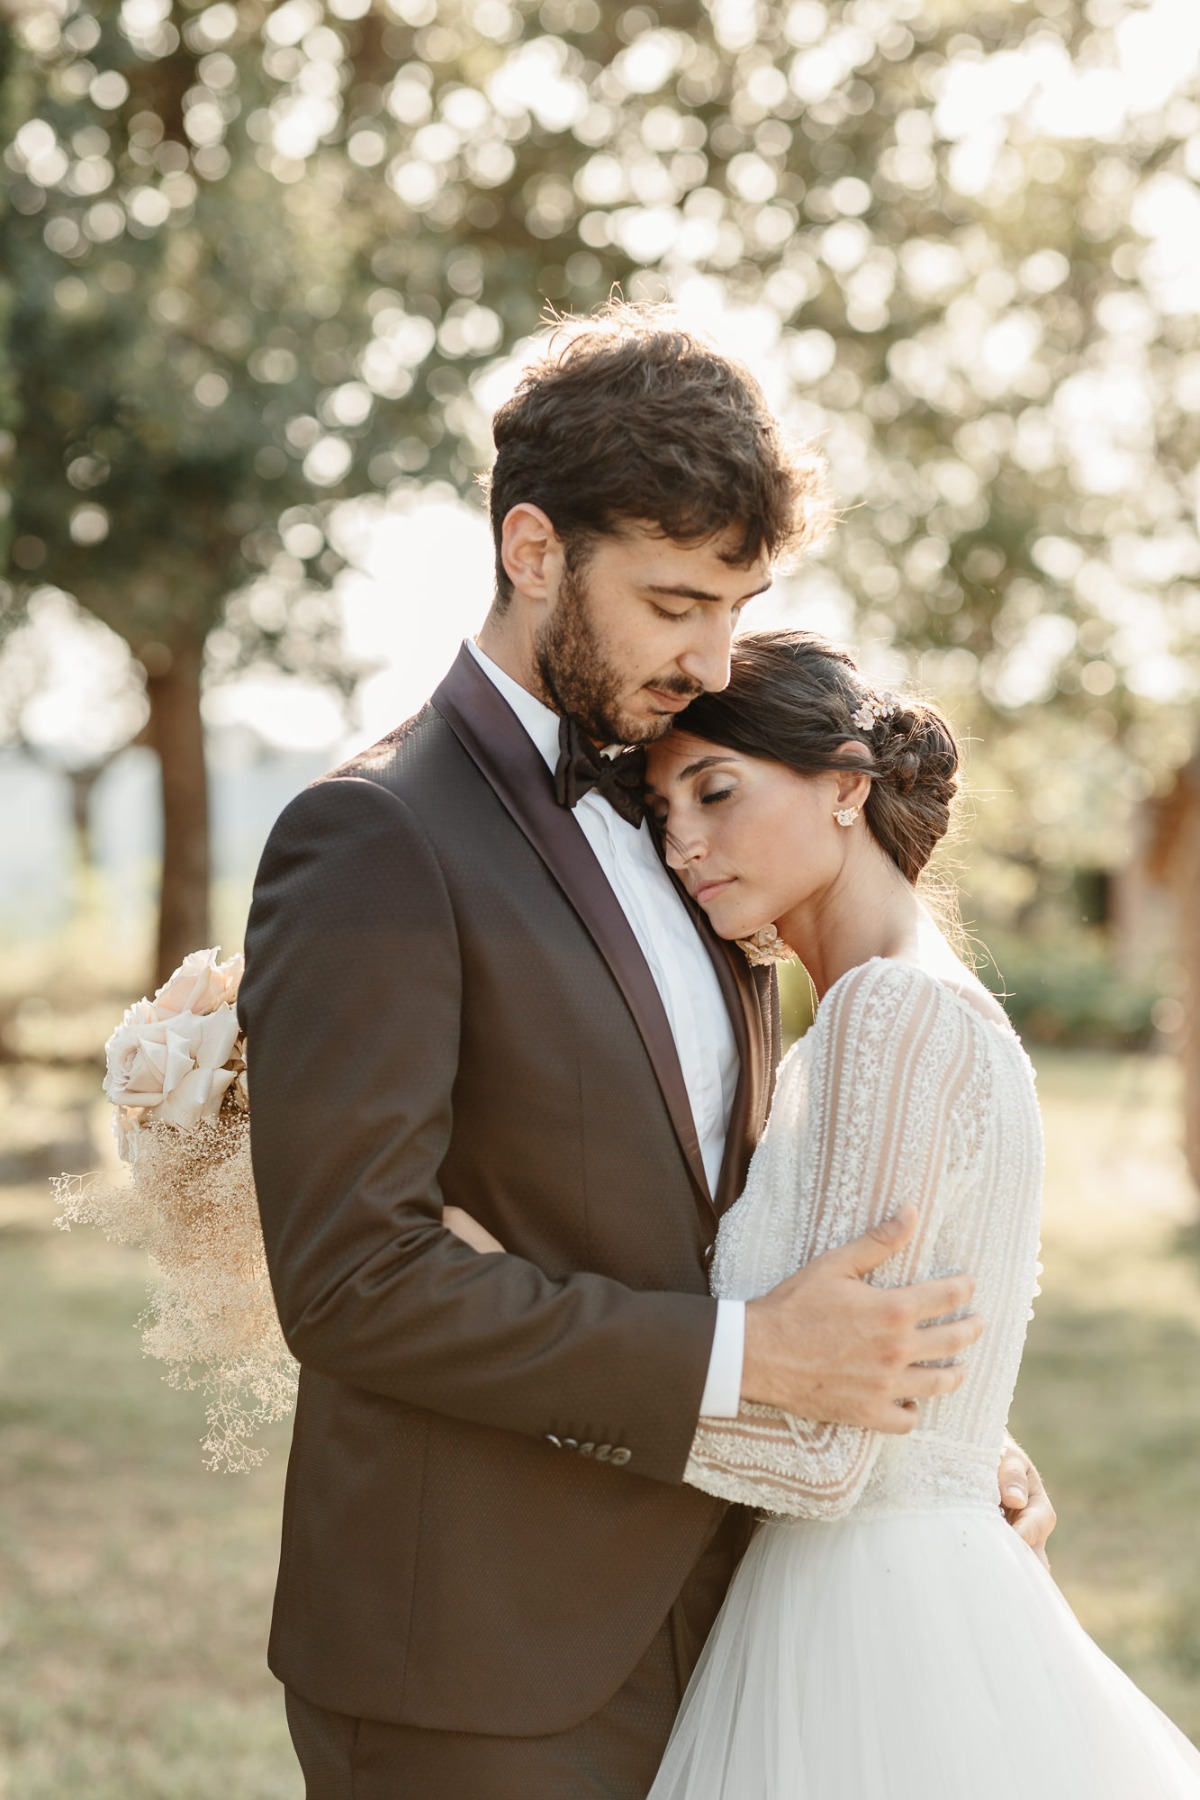 This Elopement Inspiration Shoot In The Italian Countryside Is On-PointeâLiterally